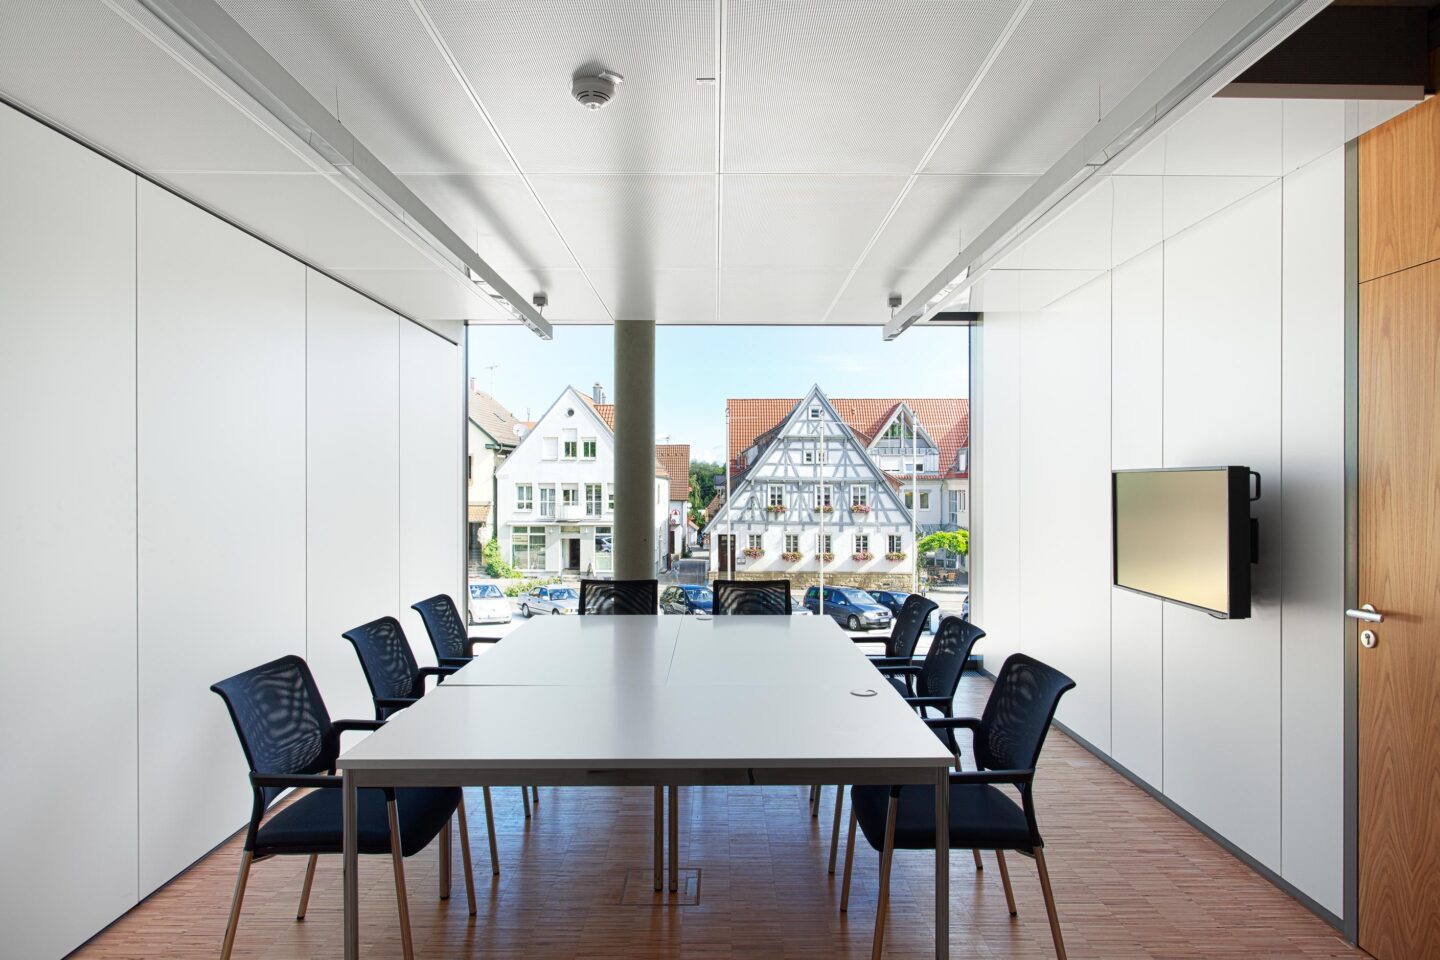 Town Hall Leingarten │ corridor and office partition wall │ high-quality workmanship of its feco system partition walls